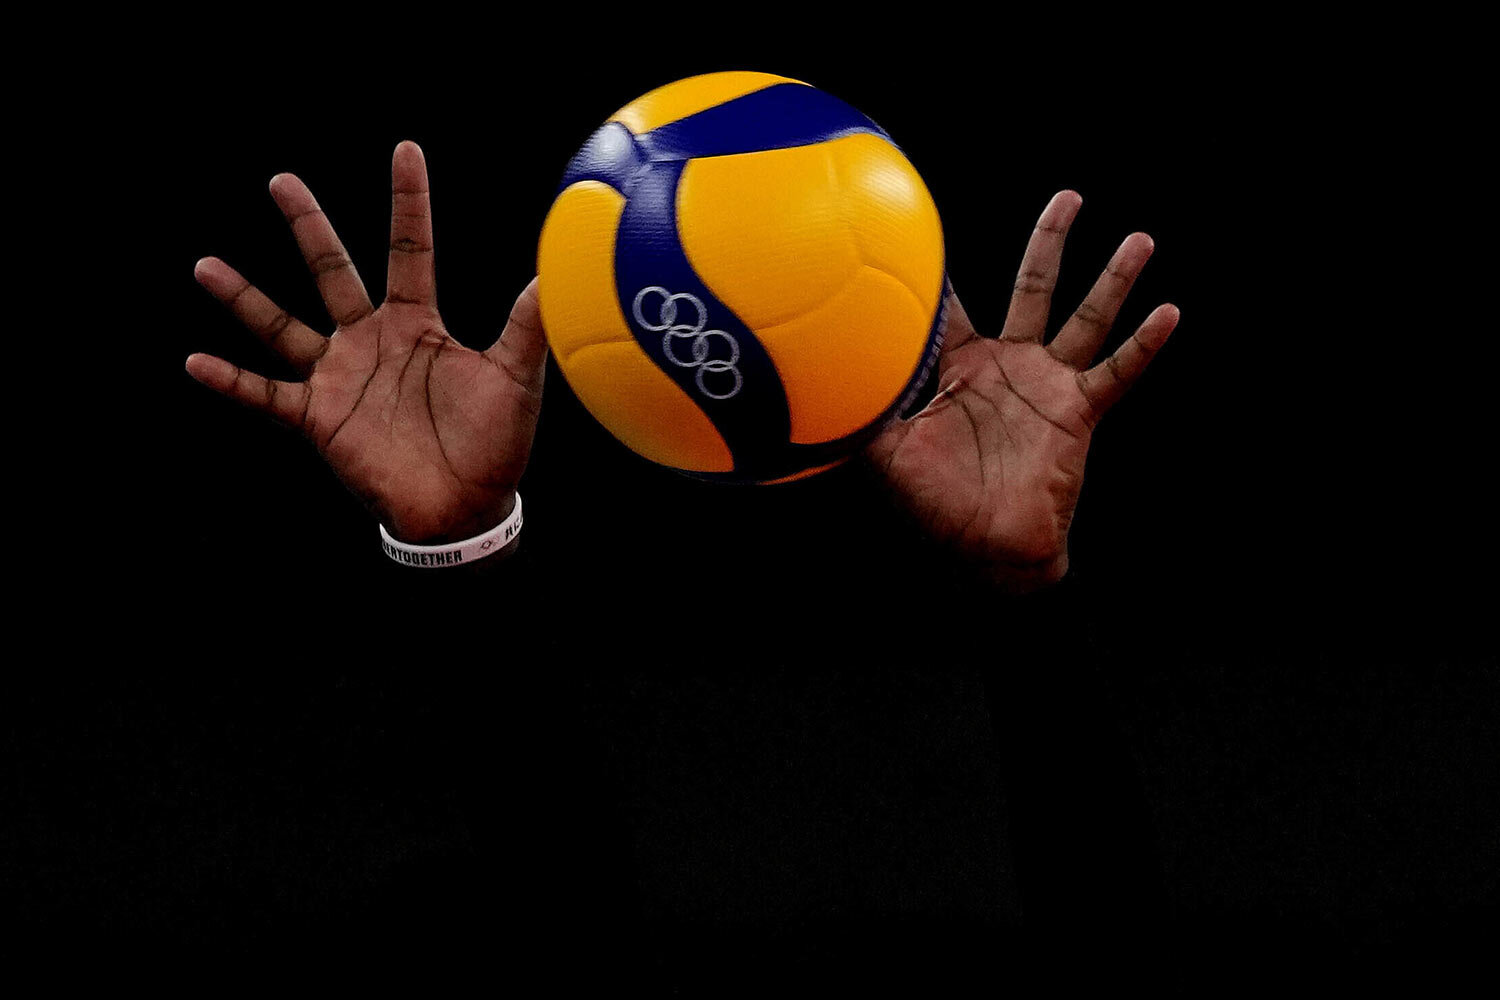  The hands of Kenya's Sharon Chepchumba Kiprono block the ball during the women's volleyball preliminary round pool A match between Dominican Republic and Kenya at the 2020 Summer Olympics, Saturday, July 31, 2021, in Tokyo, Japan. (AP Photo/Frank Au